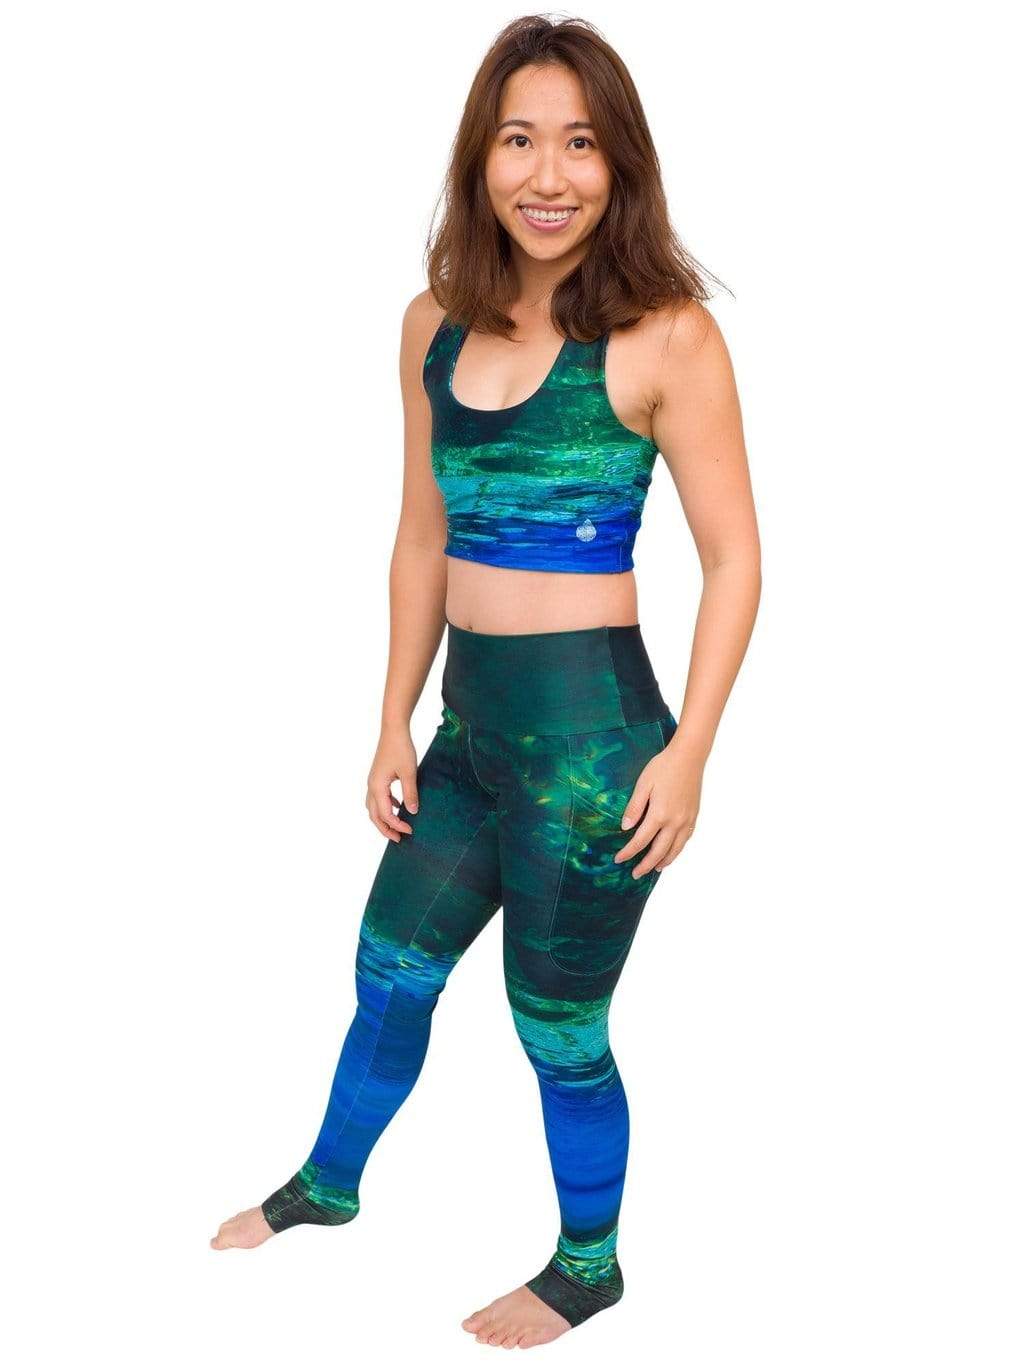 Model: Laura is a hurricane researcher and avid scuba diver. She is 5&#39;3&quot;, 120lbs, 34B and is wearing a S top and leggings.